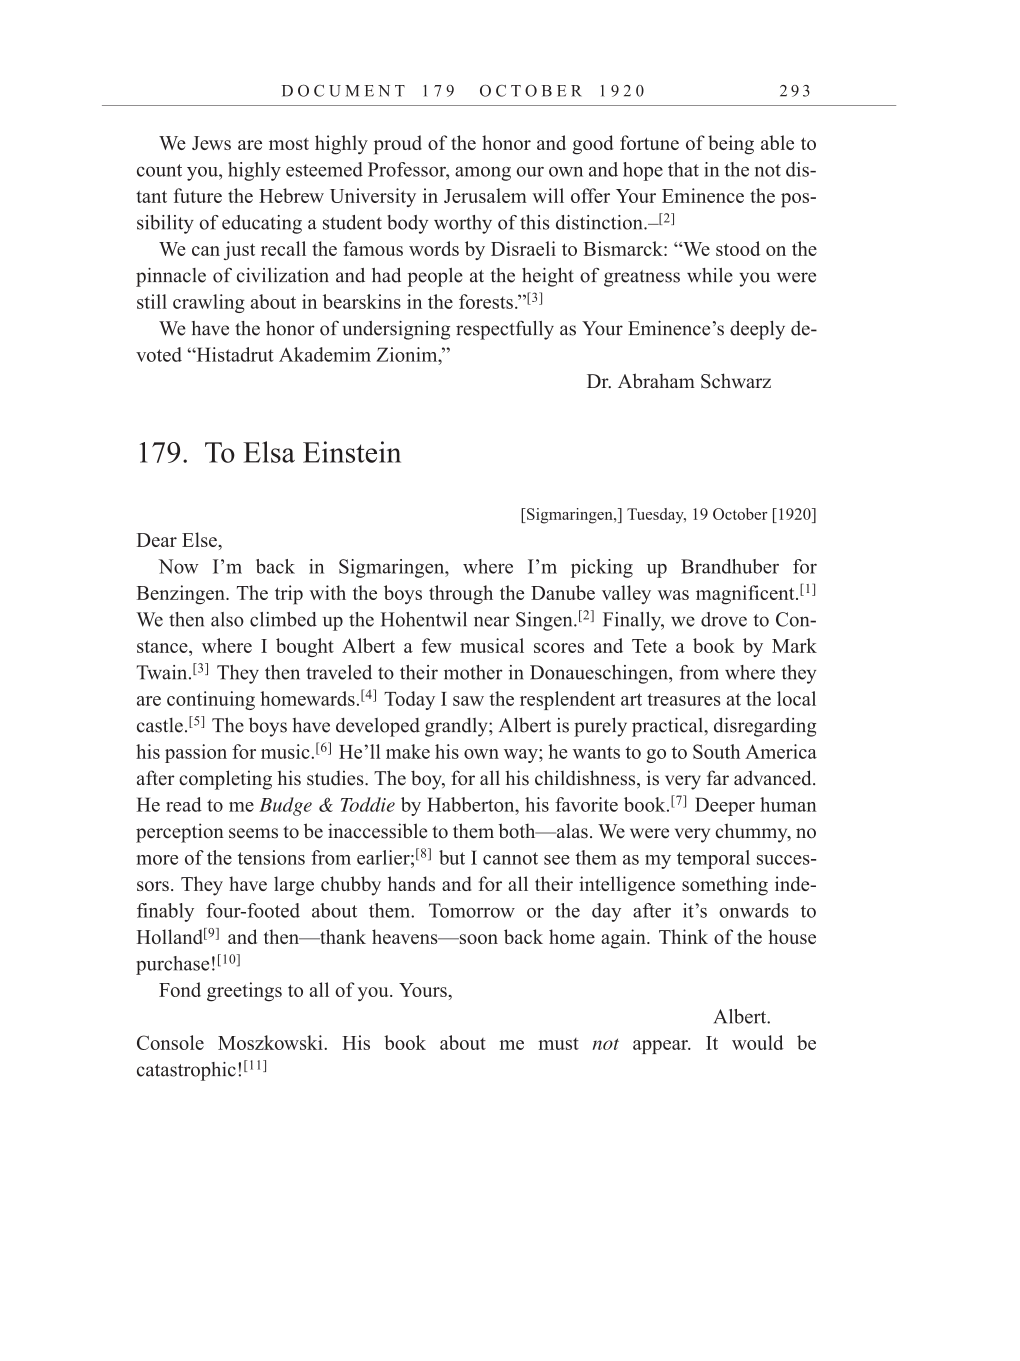 Volume 10: The Berlin Years: Correspondence, May-December 1920, and Supplementary Correspondence, 1909-1920 (English translation supplement) page 293